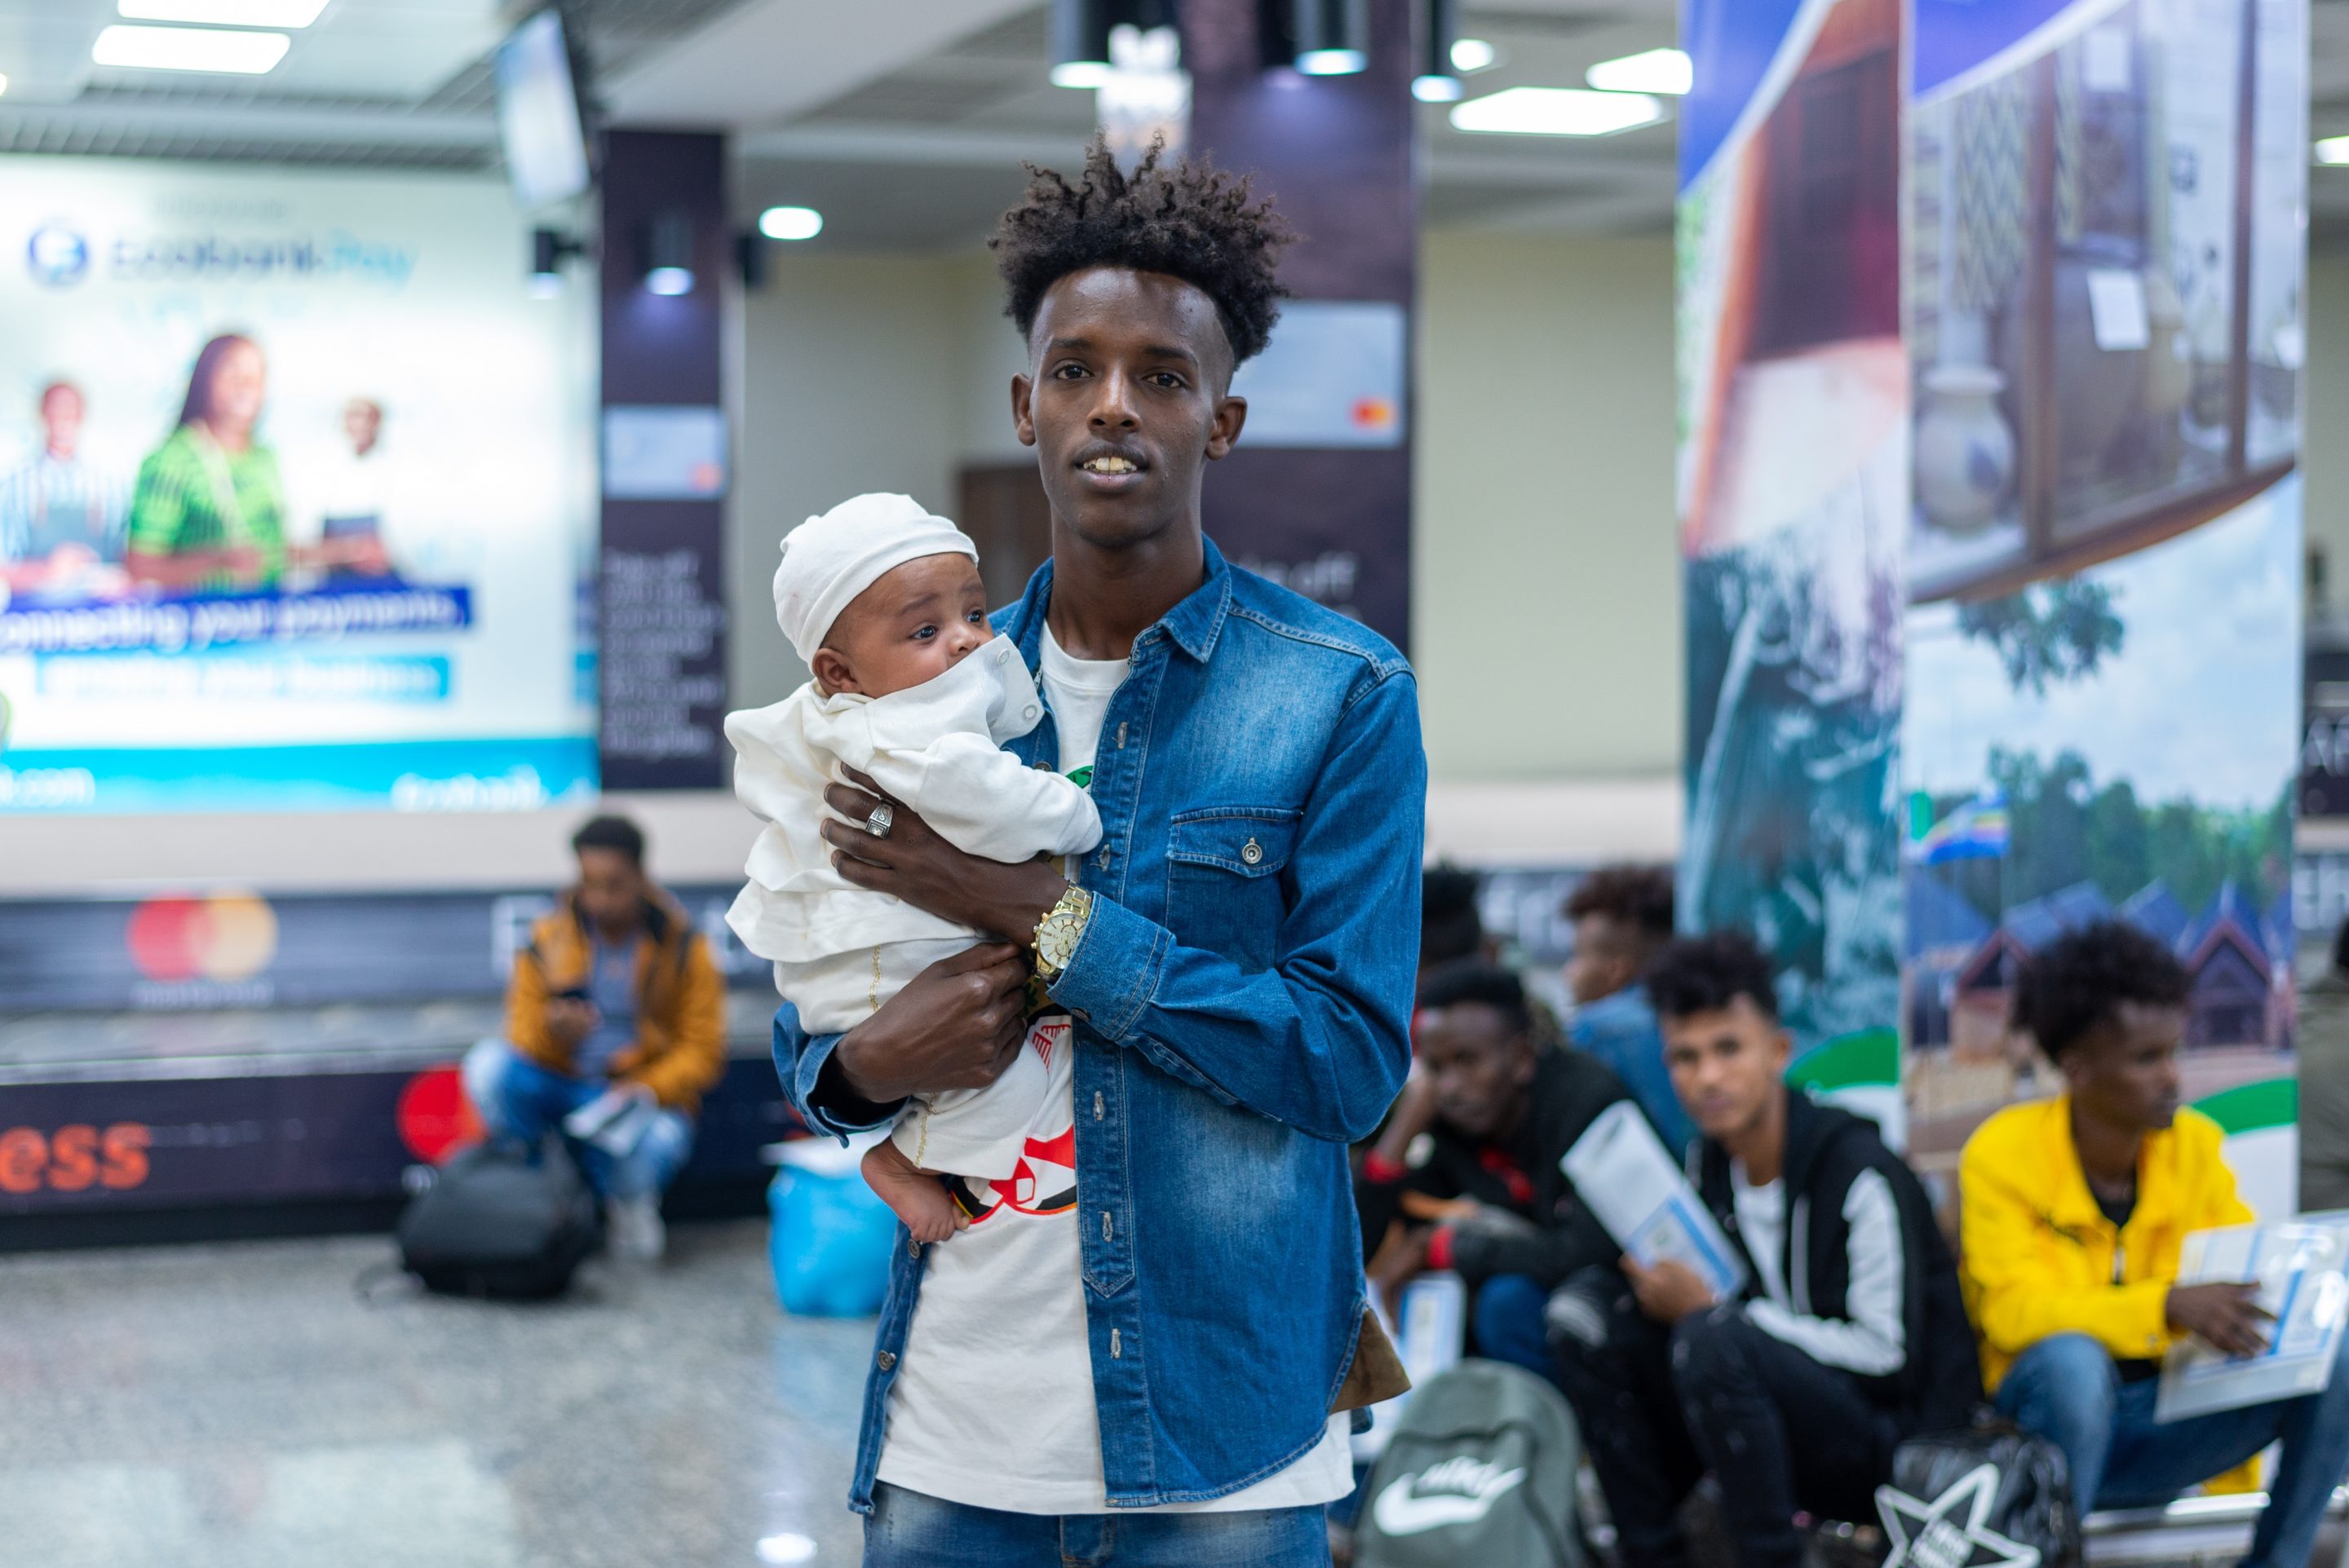 A man stands in an airport lobby carrying his child